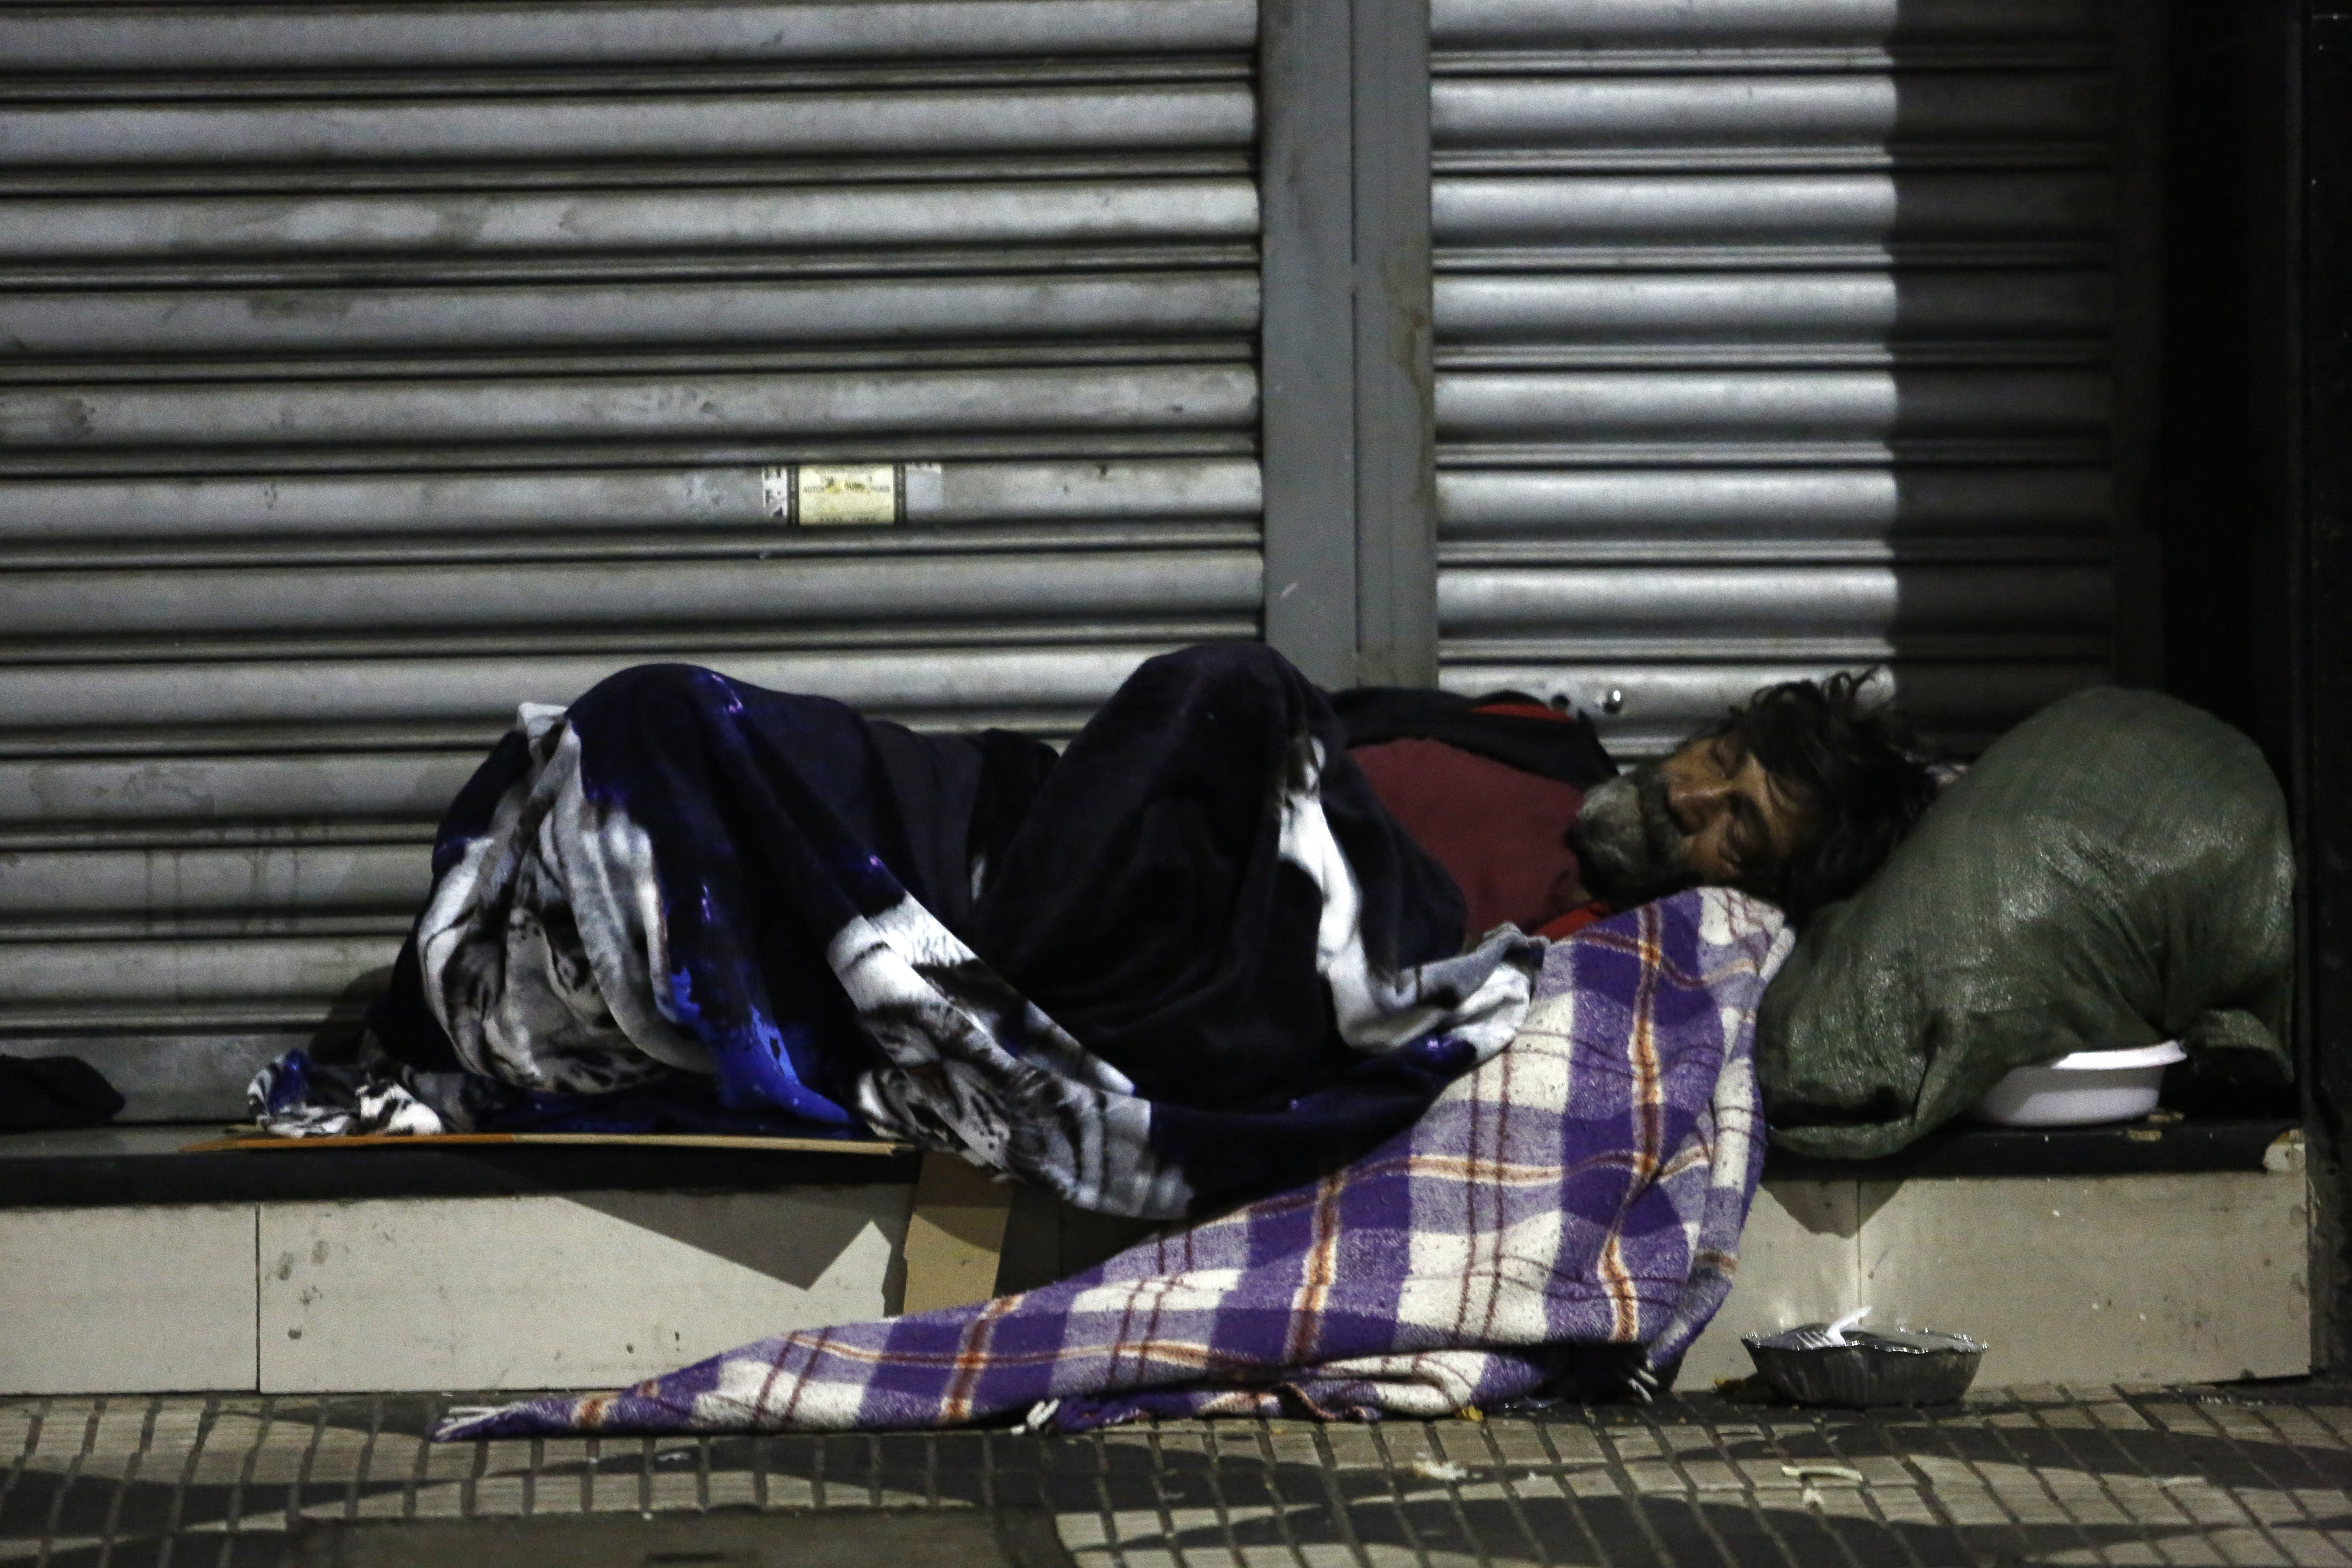 A homeless man spends the night on the street in downtown Sao Paulo, Brazil, on June 26, 2016. Earlier this month six homeless people died of cold in Sao Paulo, the richest city in Brazil, where some 16,000 homeless live on the streets. / AFP PHOTO / Miguel Schincariol / TO GO WITH AFP STORY BY ROSA SULLEIRO